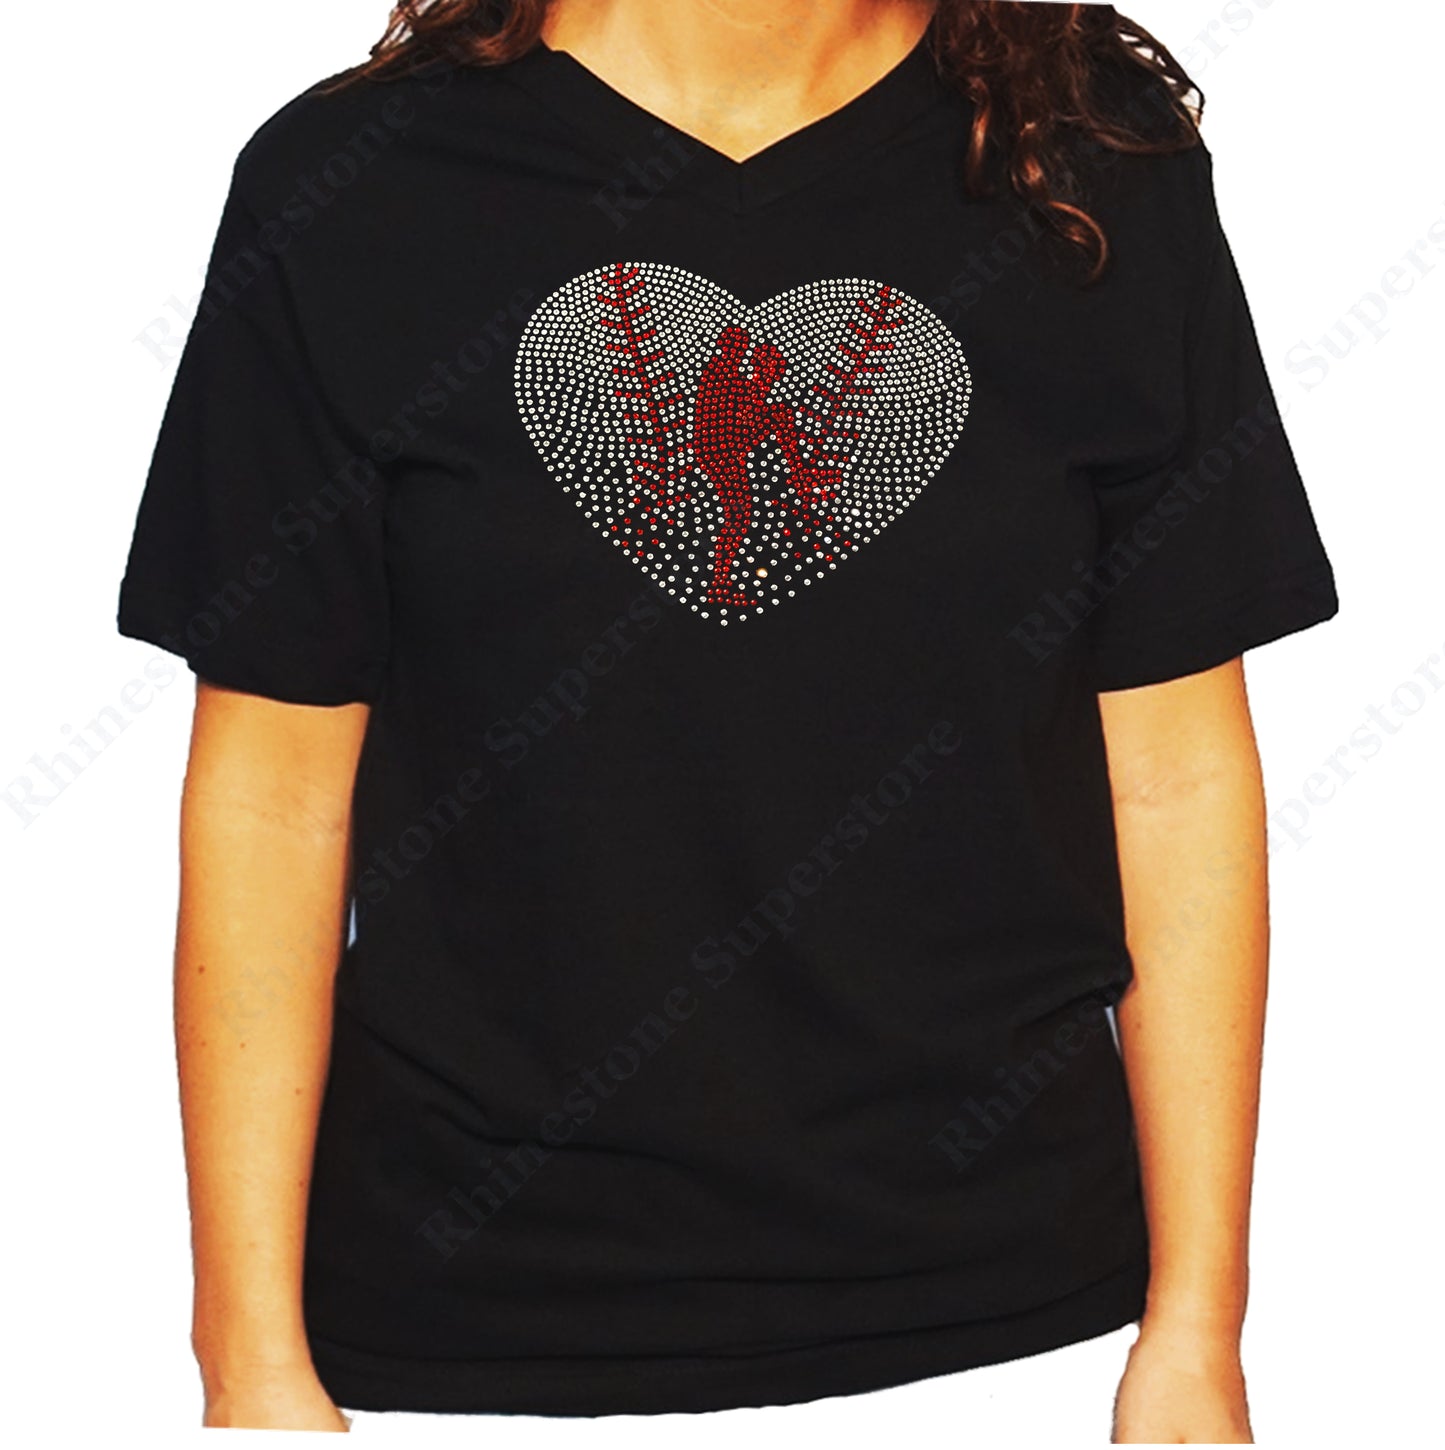 Women's / Unisex T-Shirt with Baseball Heart with Pitcher in Rhinestones